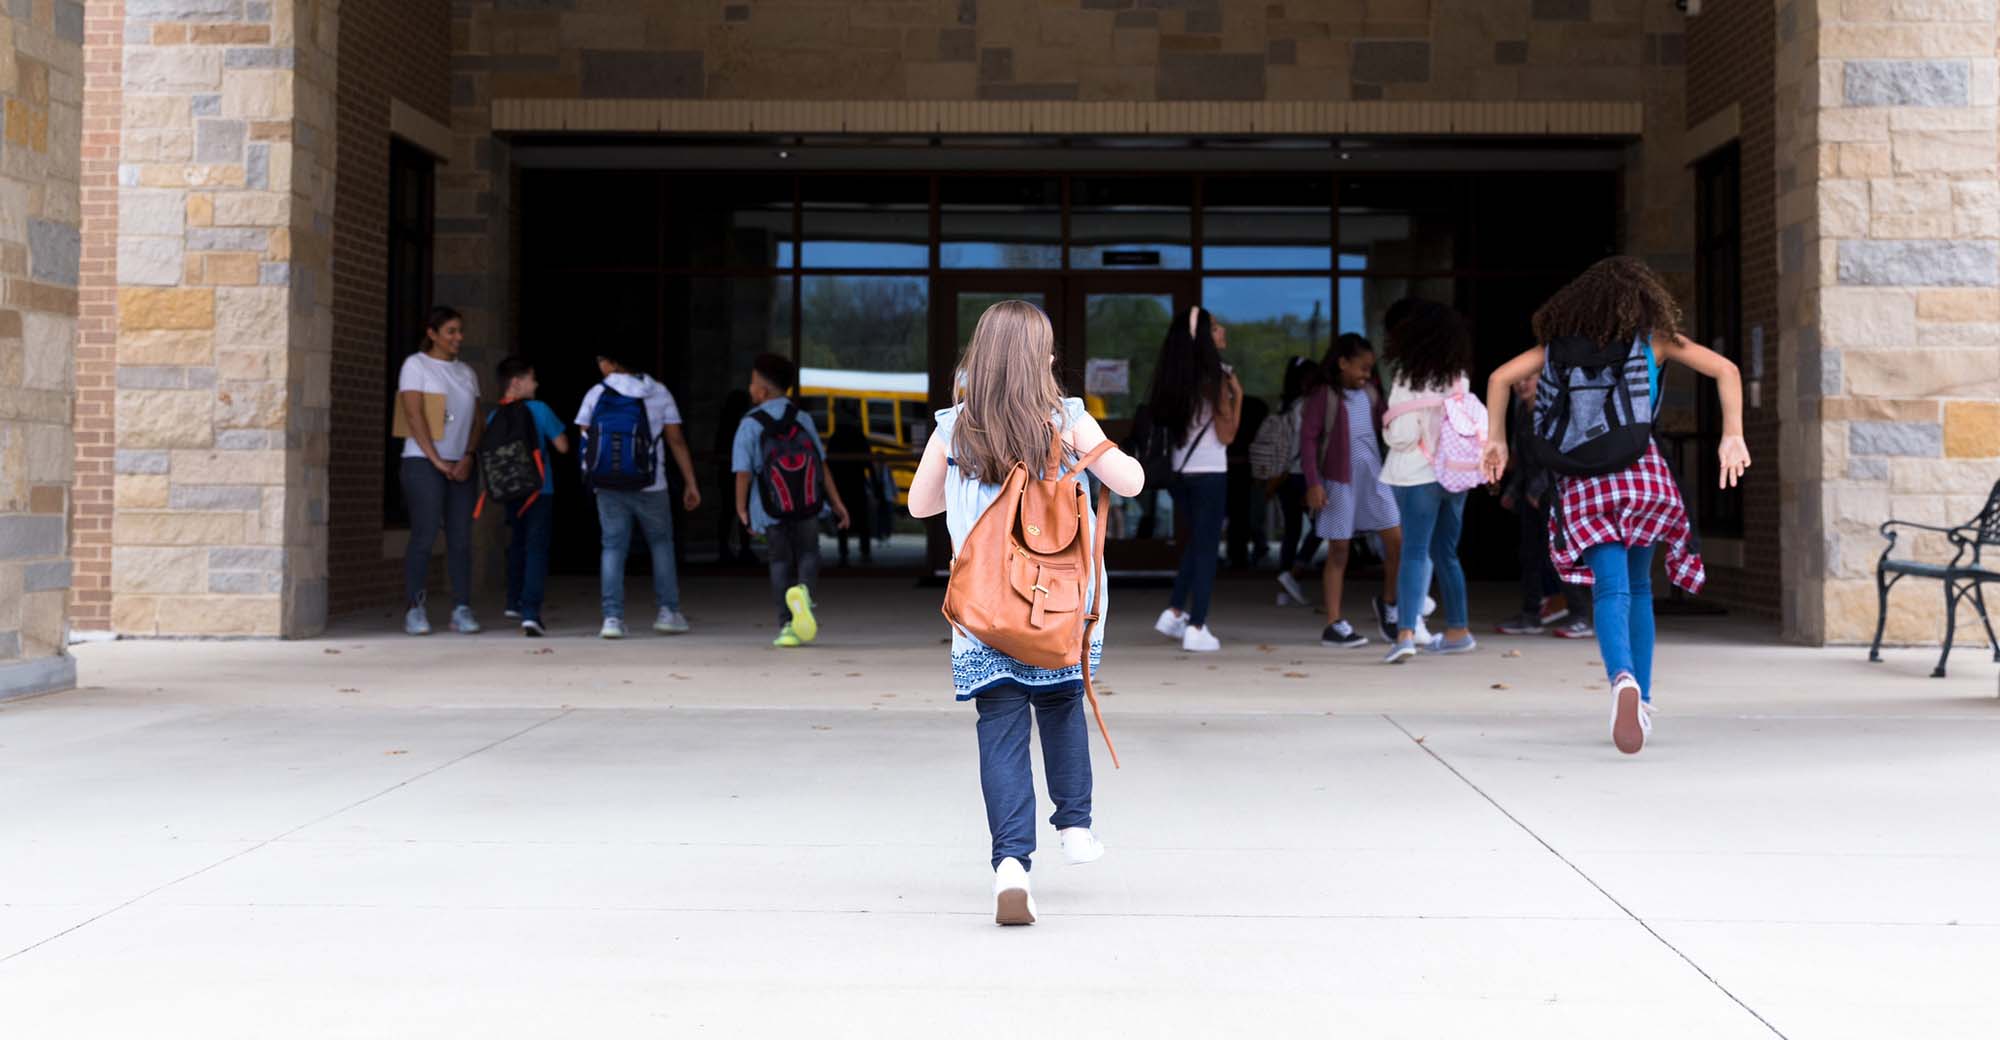 Rear view of elementary school girl walking into the school building. Other students walk into the building ahead of her.